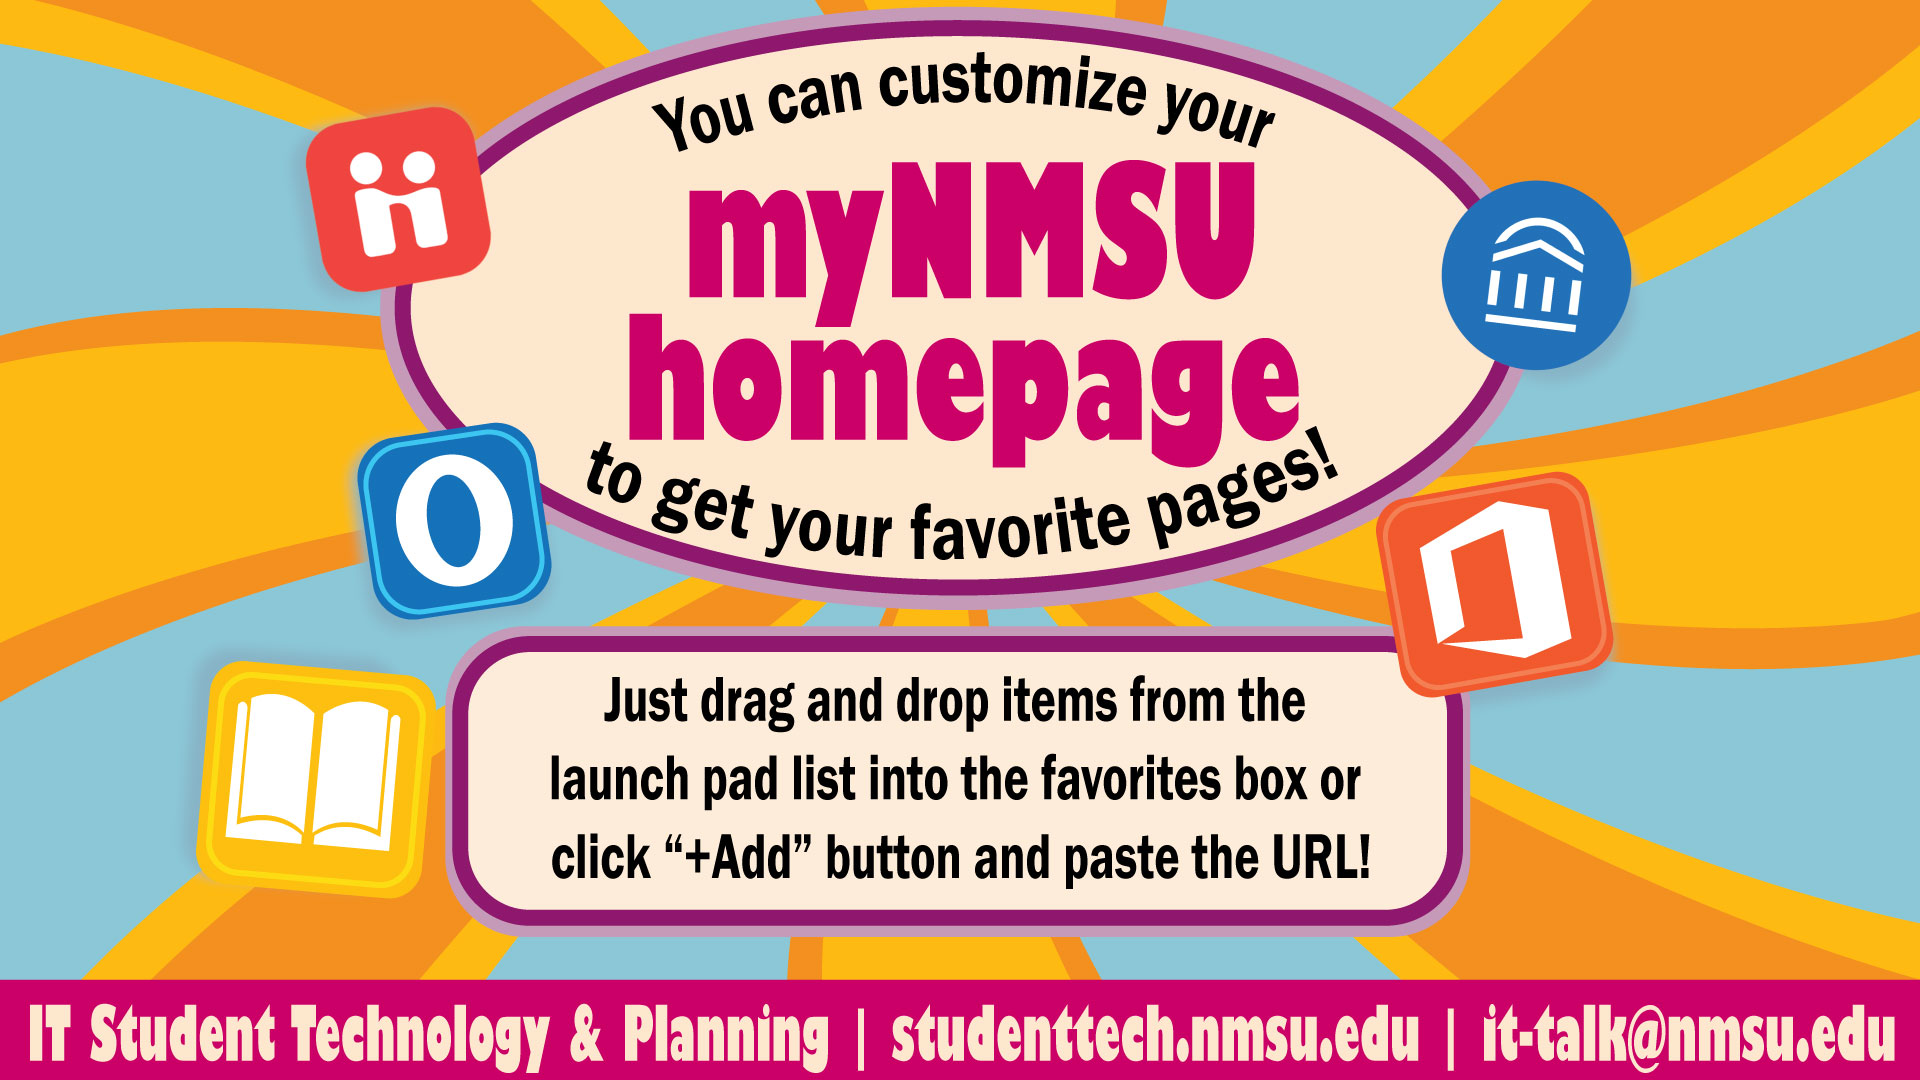 You can customize your myNMSU homepage. Just drag and drop items from the launchpad into the favorites box or click the +Add button and paste the url!